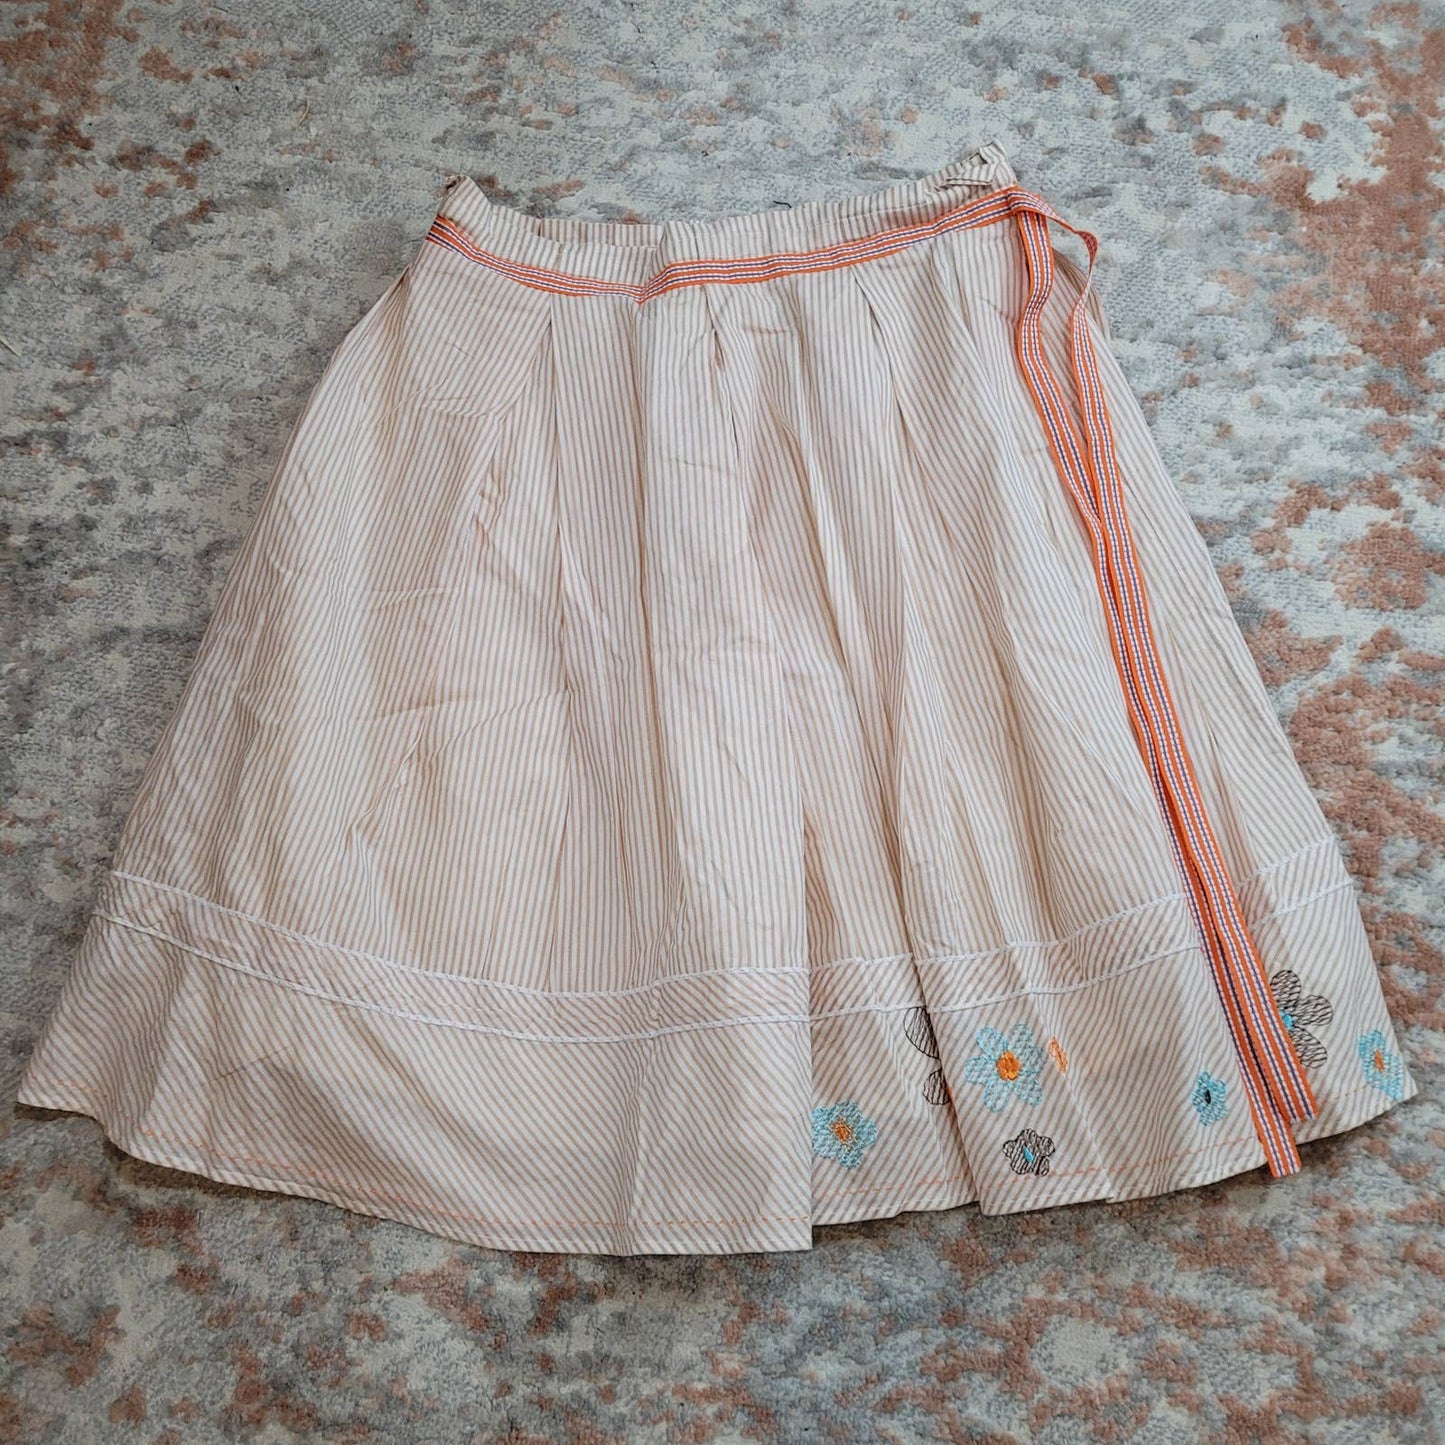 Autograph New York Orange Striped Skirt with Embroidered Flowers - Size 4